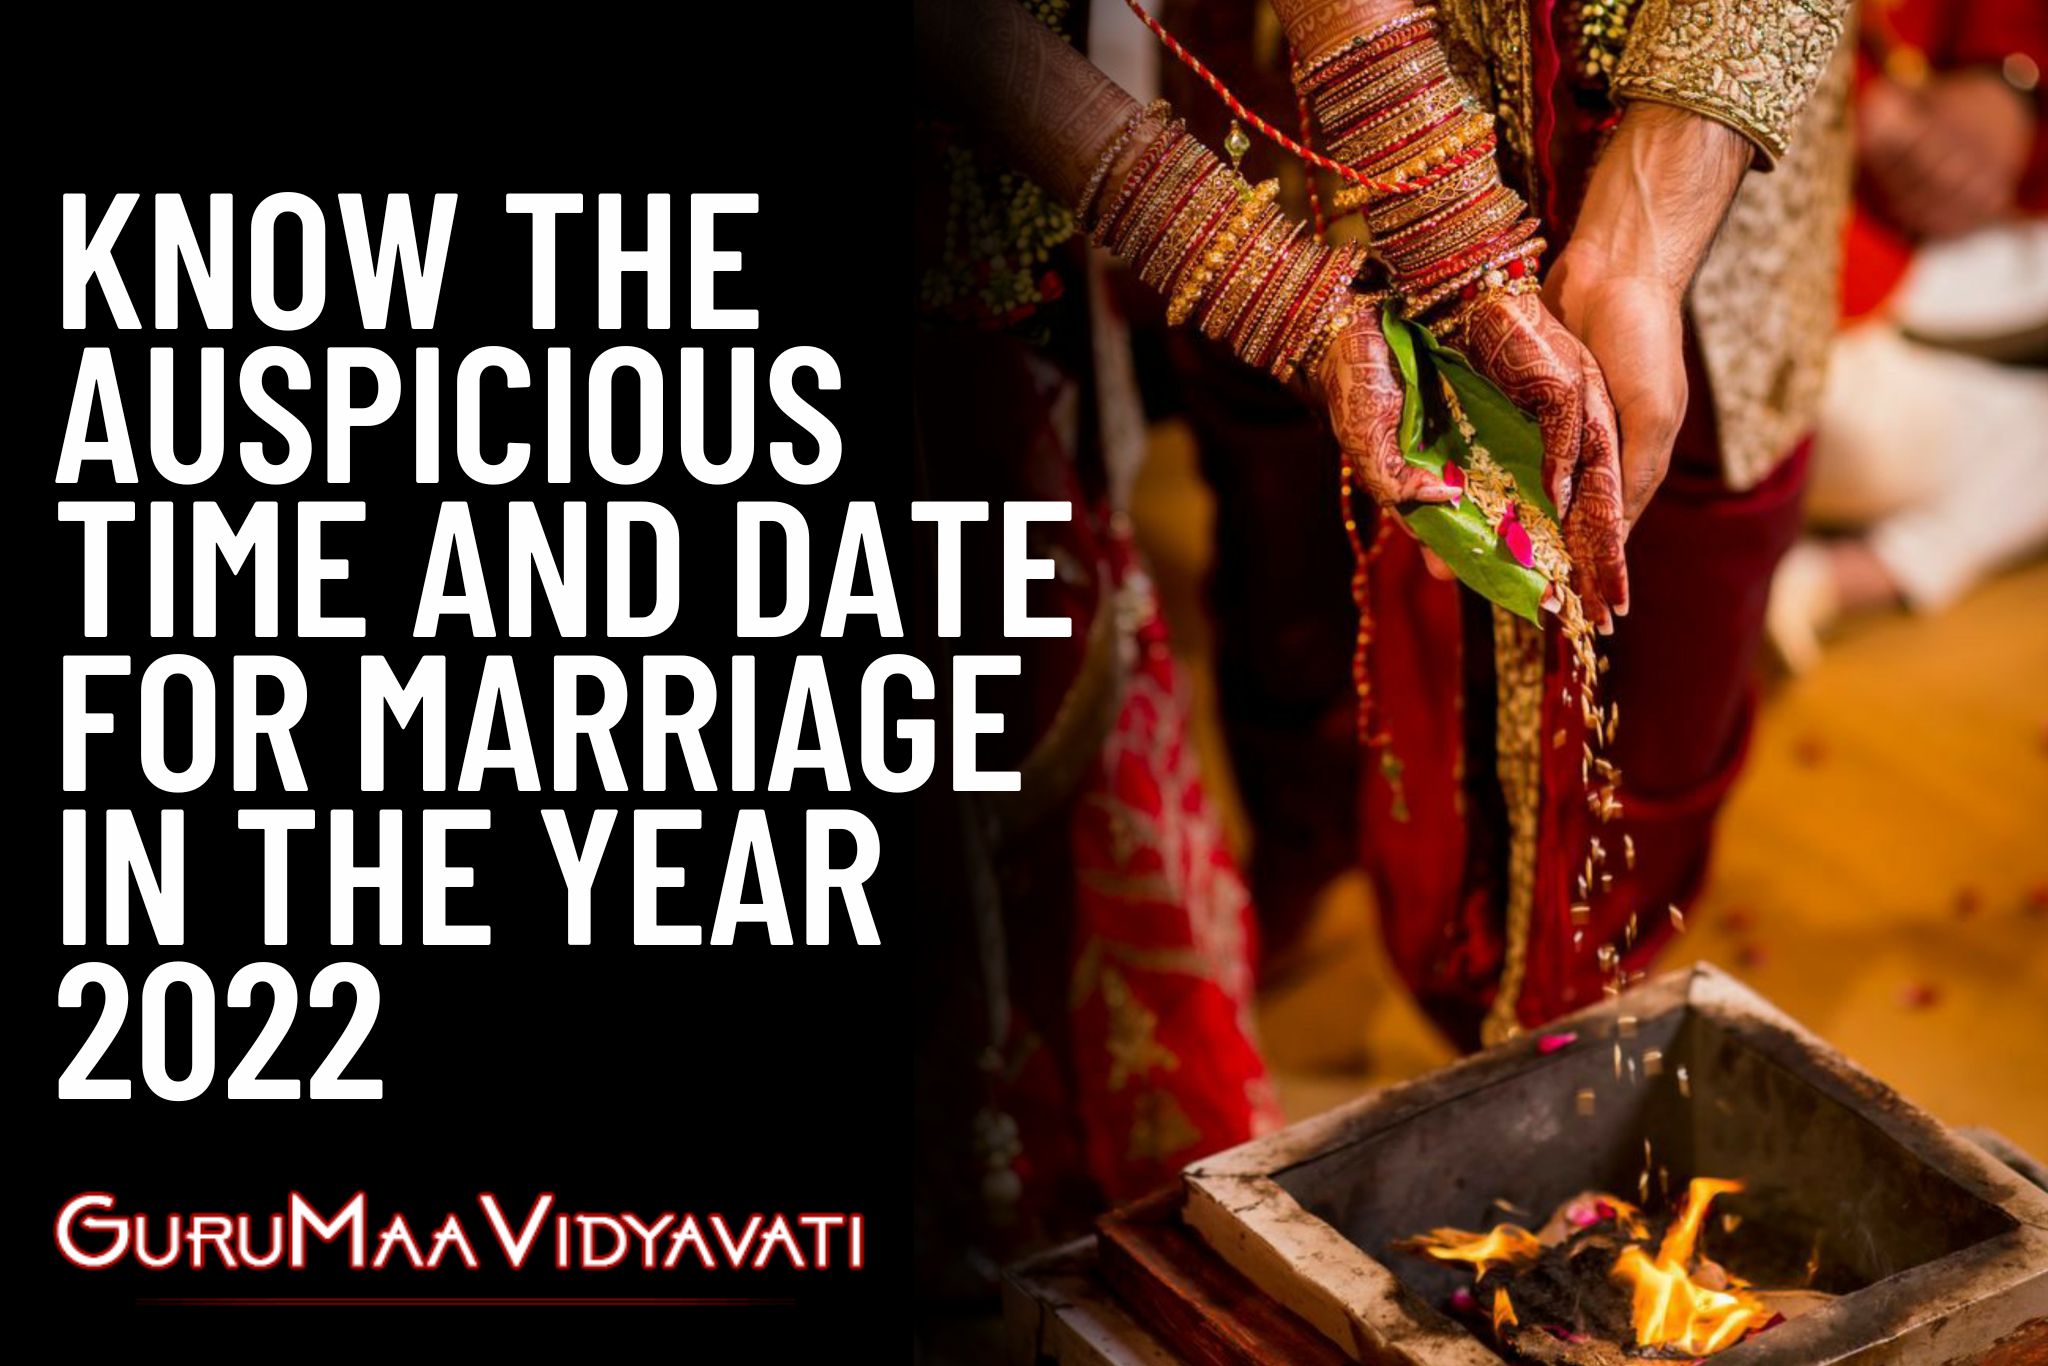 Marriage Shubh Muhurta 2022: Know the Auspicious Time and Date for Marriage in the Year 2022